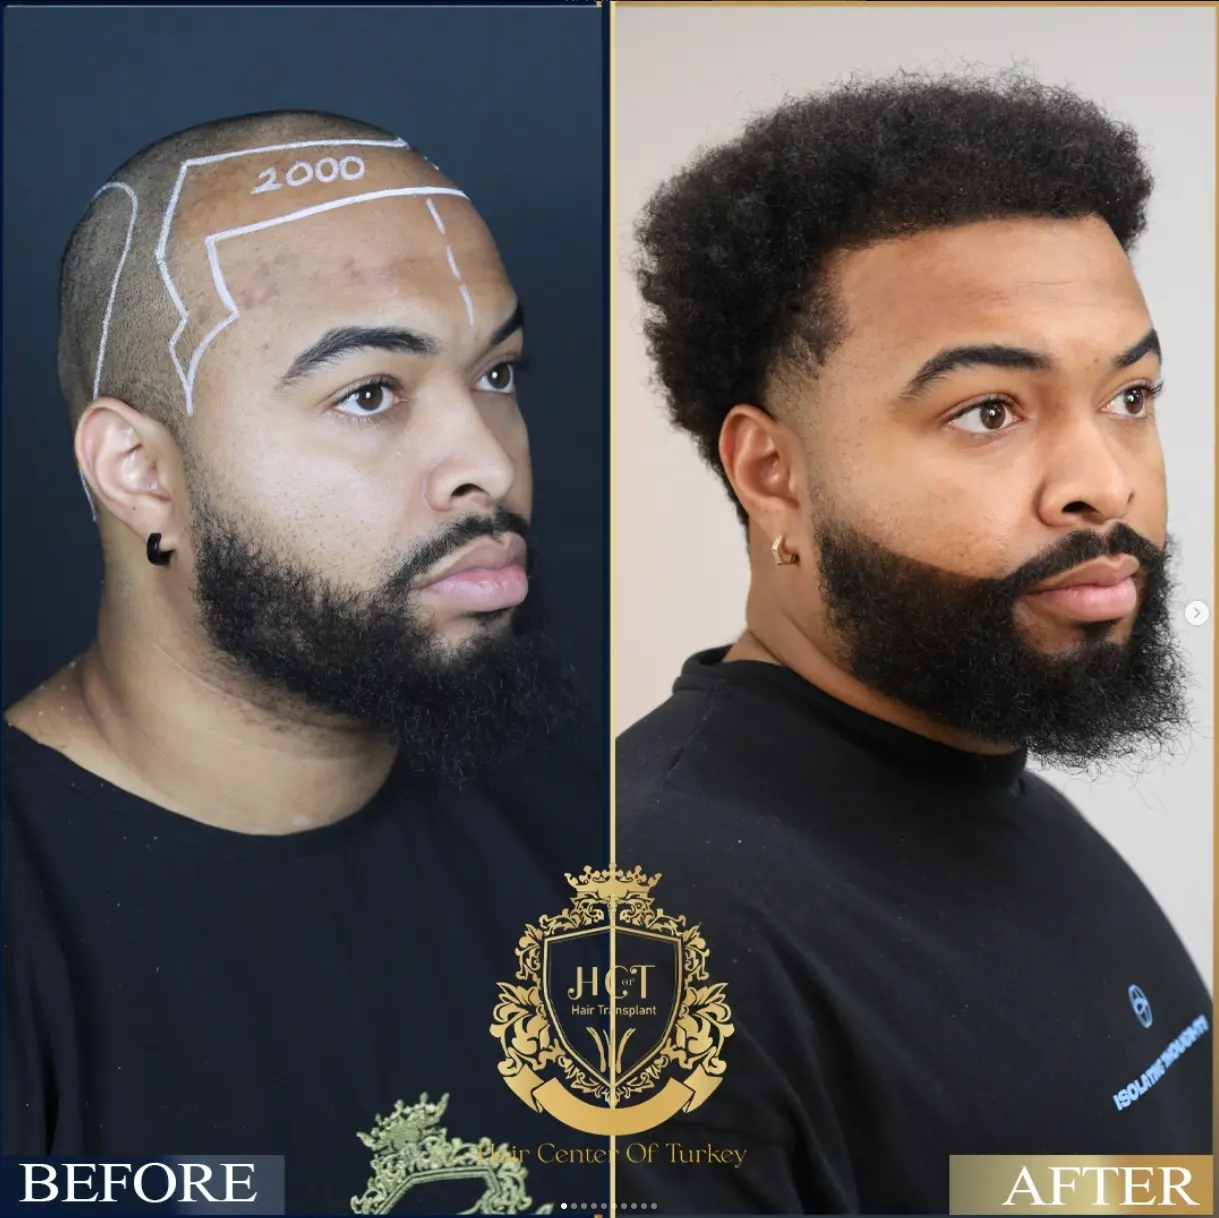 hair transplant before after 3